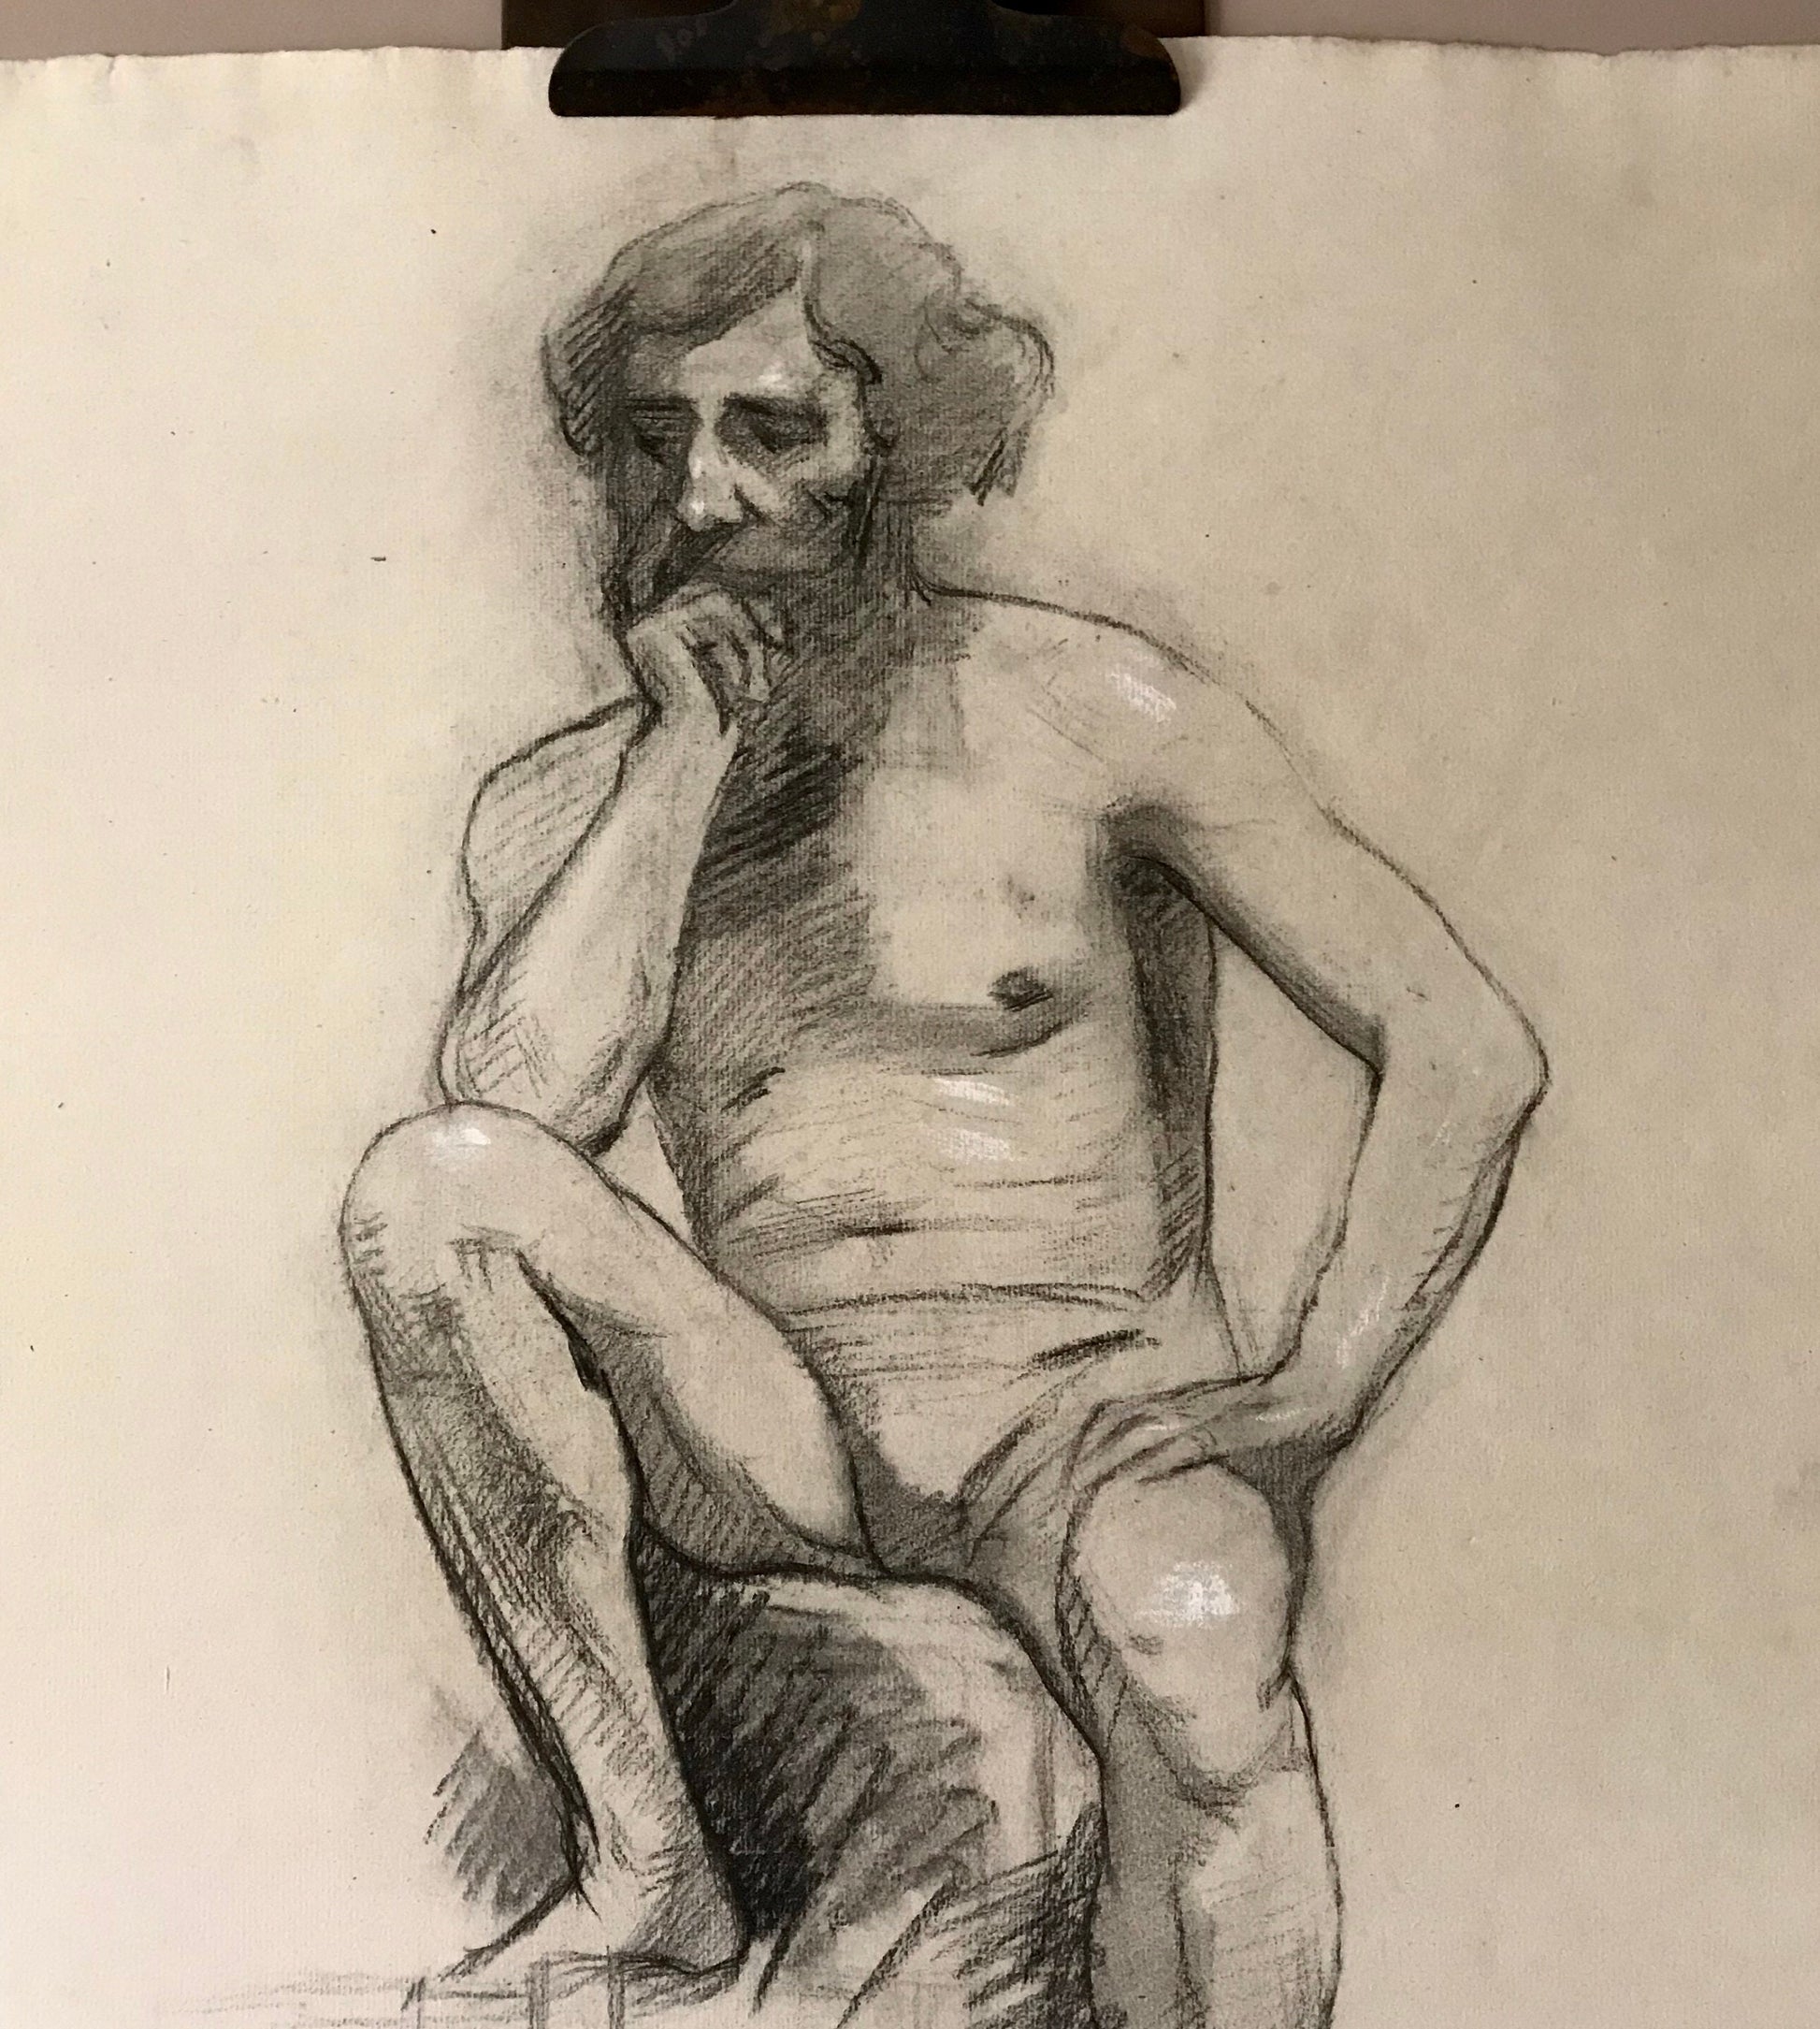 A Original Drawing From Life of a Seated Man. Charcoal With White Highlights. Early 1900’s. Large: 63 x 48 cms.